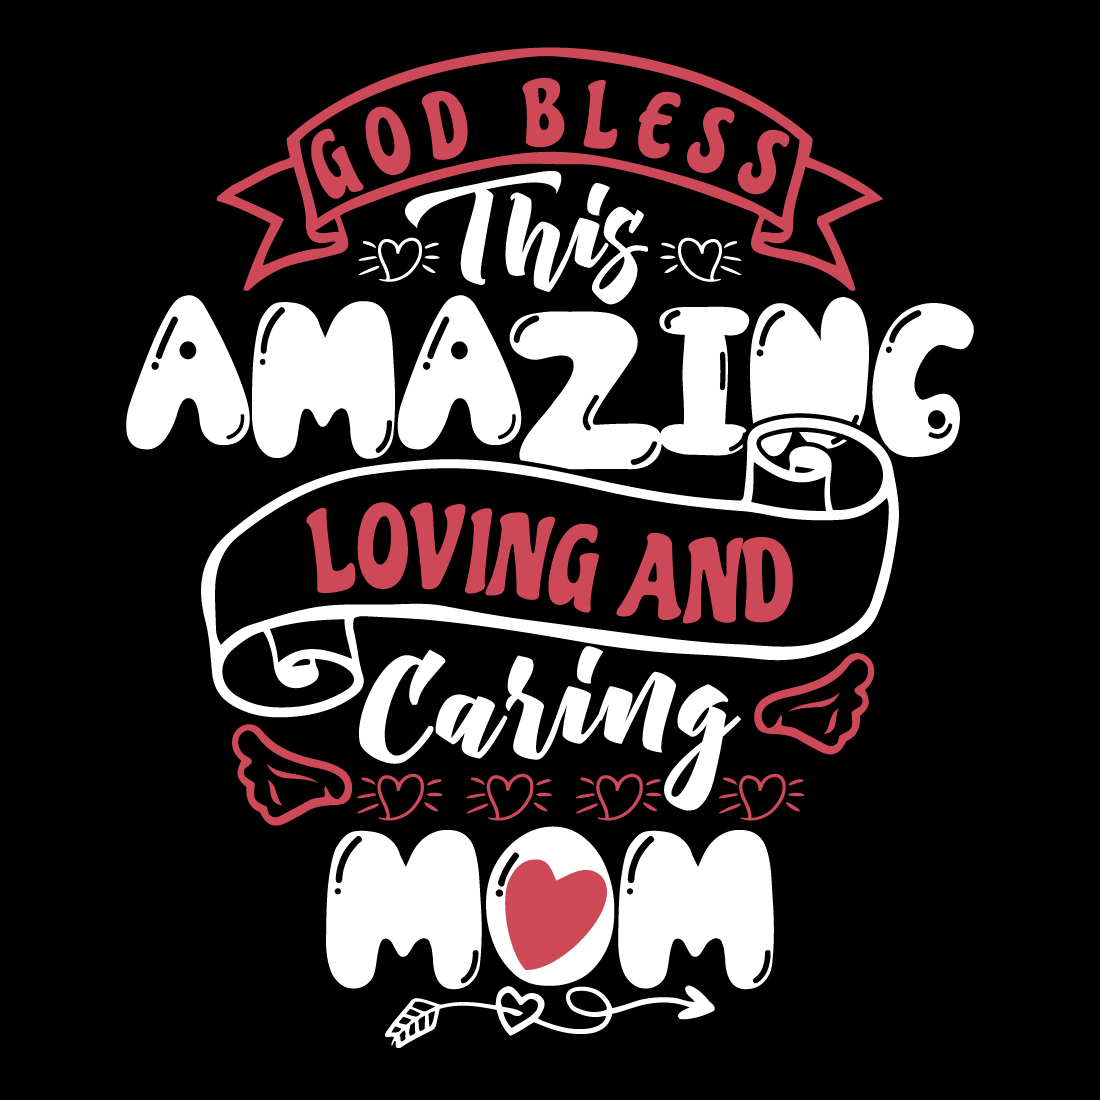 Loving and Caring mom t shirt preview image.